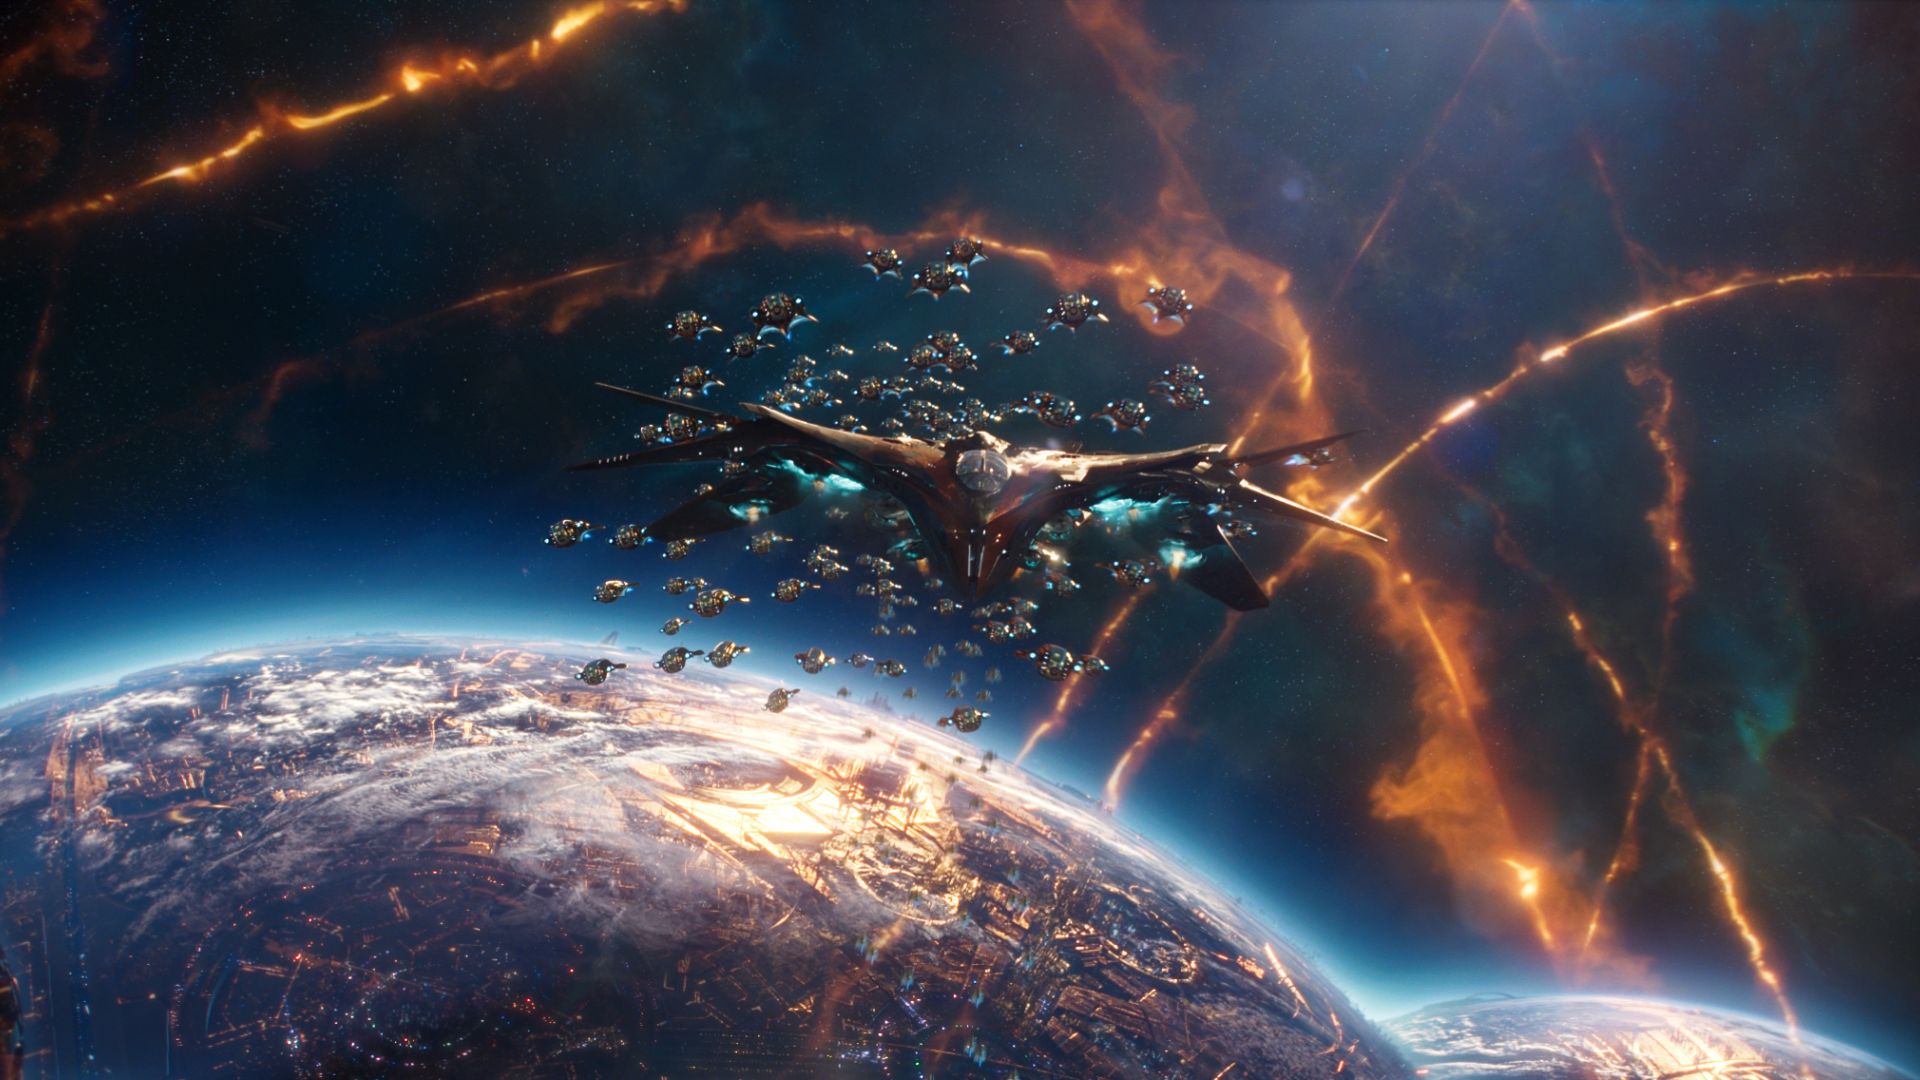 Desktop Wallpaper Guardians Of The Galaxy Vol. 2, Movie, Spaceship, Hd  Image, Picture, Background, 1f5cf9